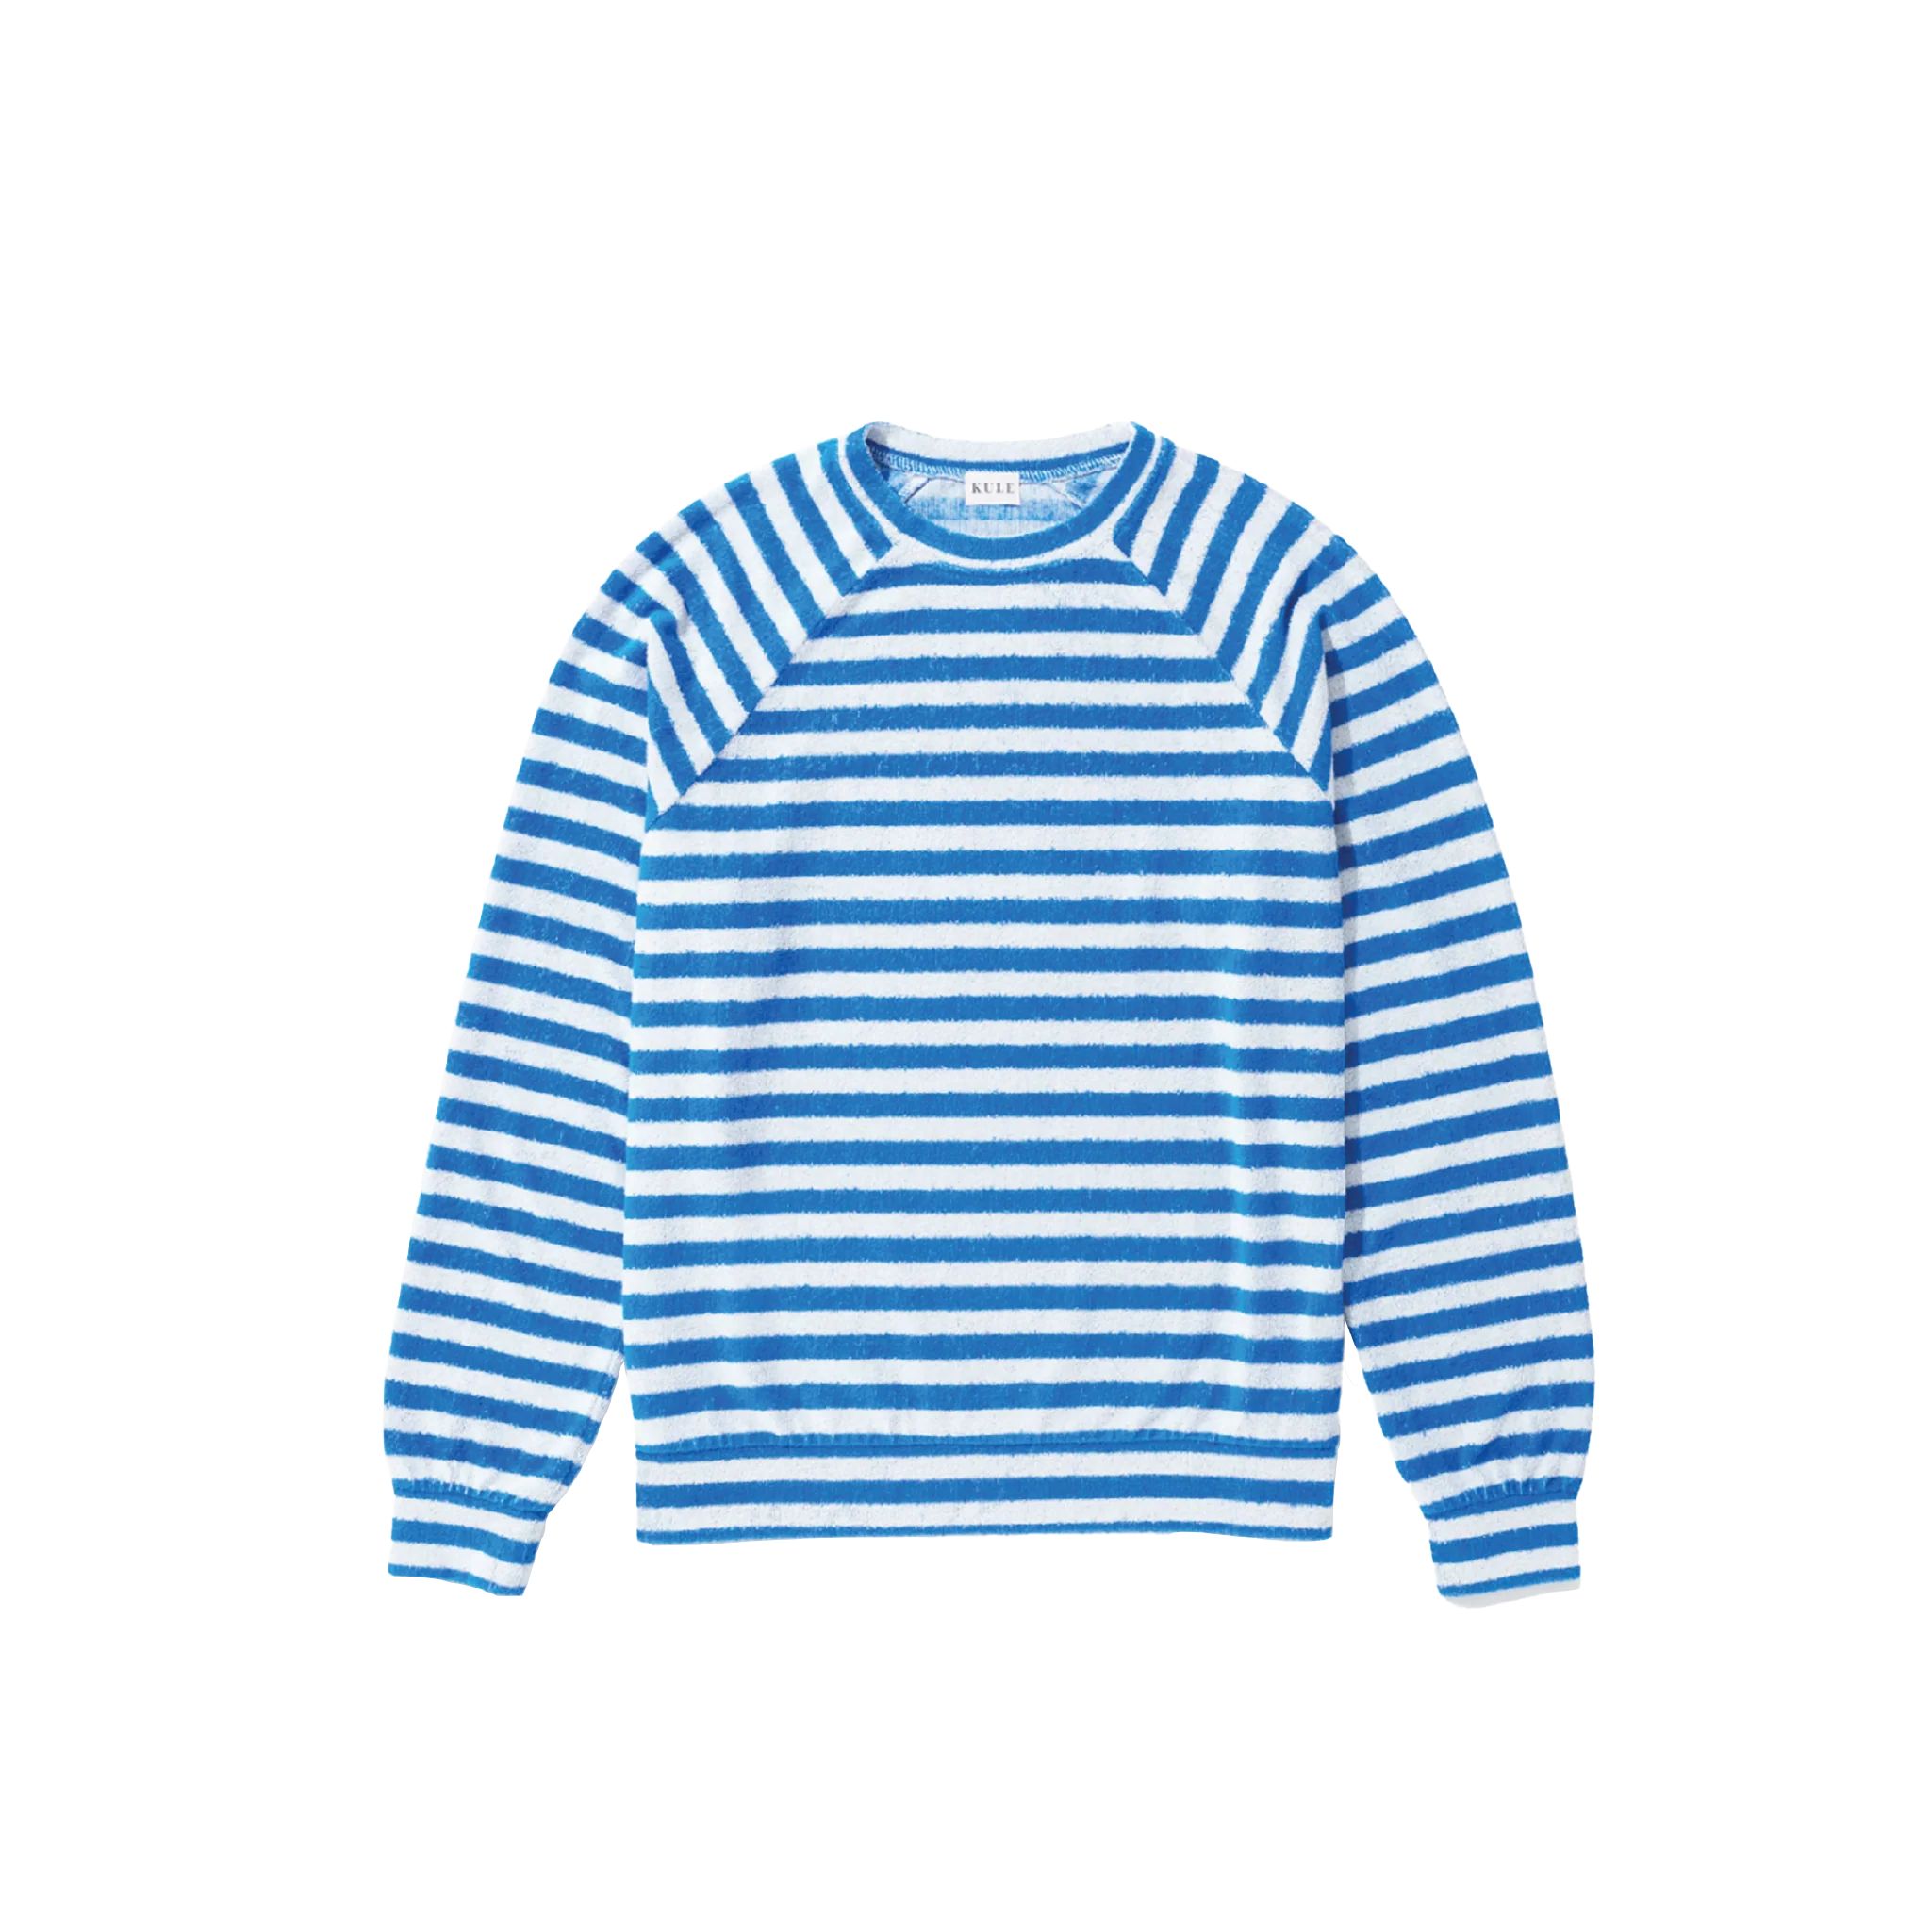 The Terry Franny Stripe | Le Weekend Studio